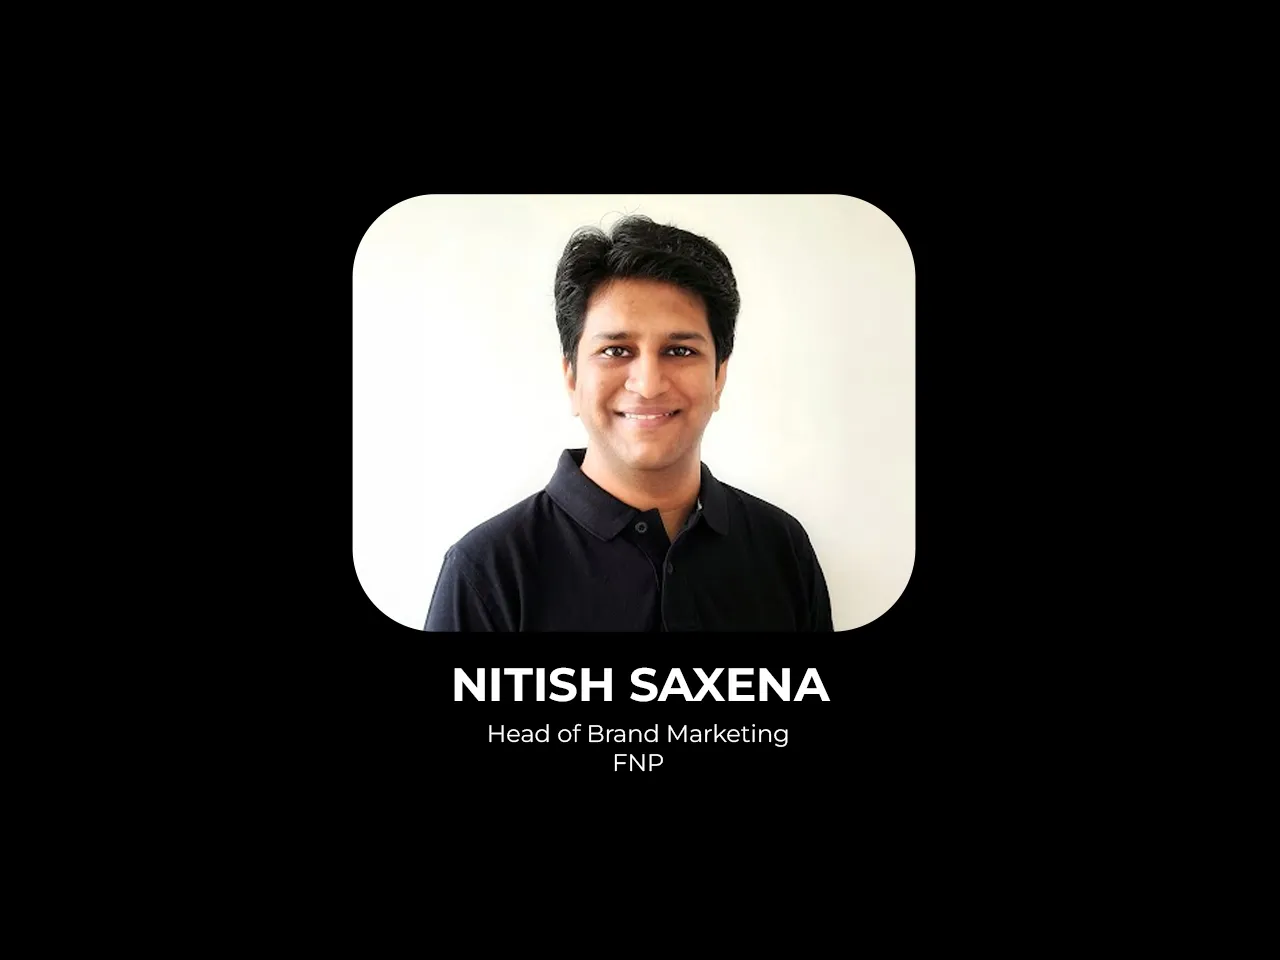 Nitish Saxena joins FNP as Head of Brand Marketing